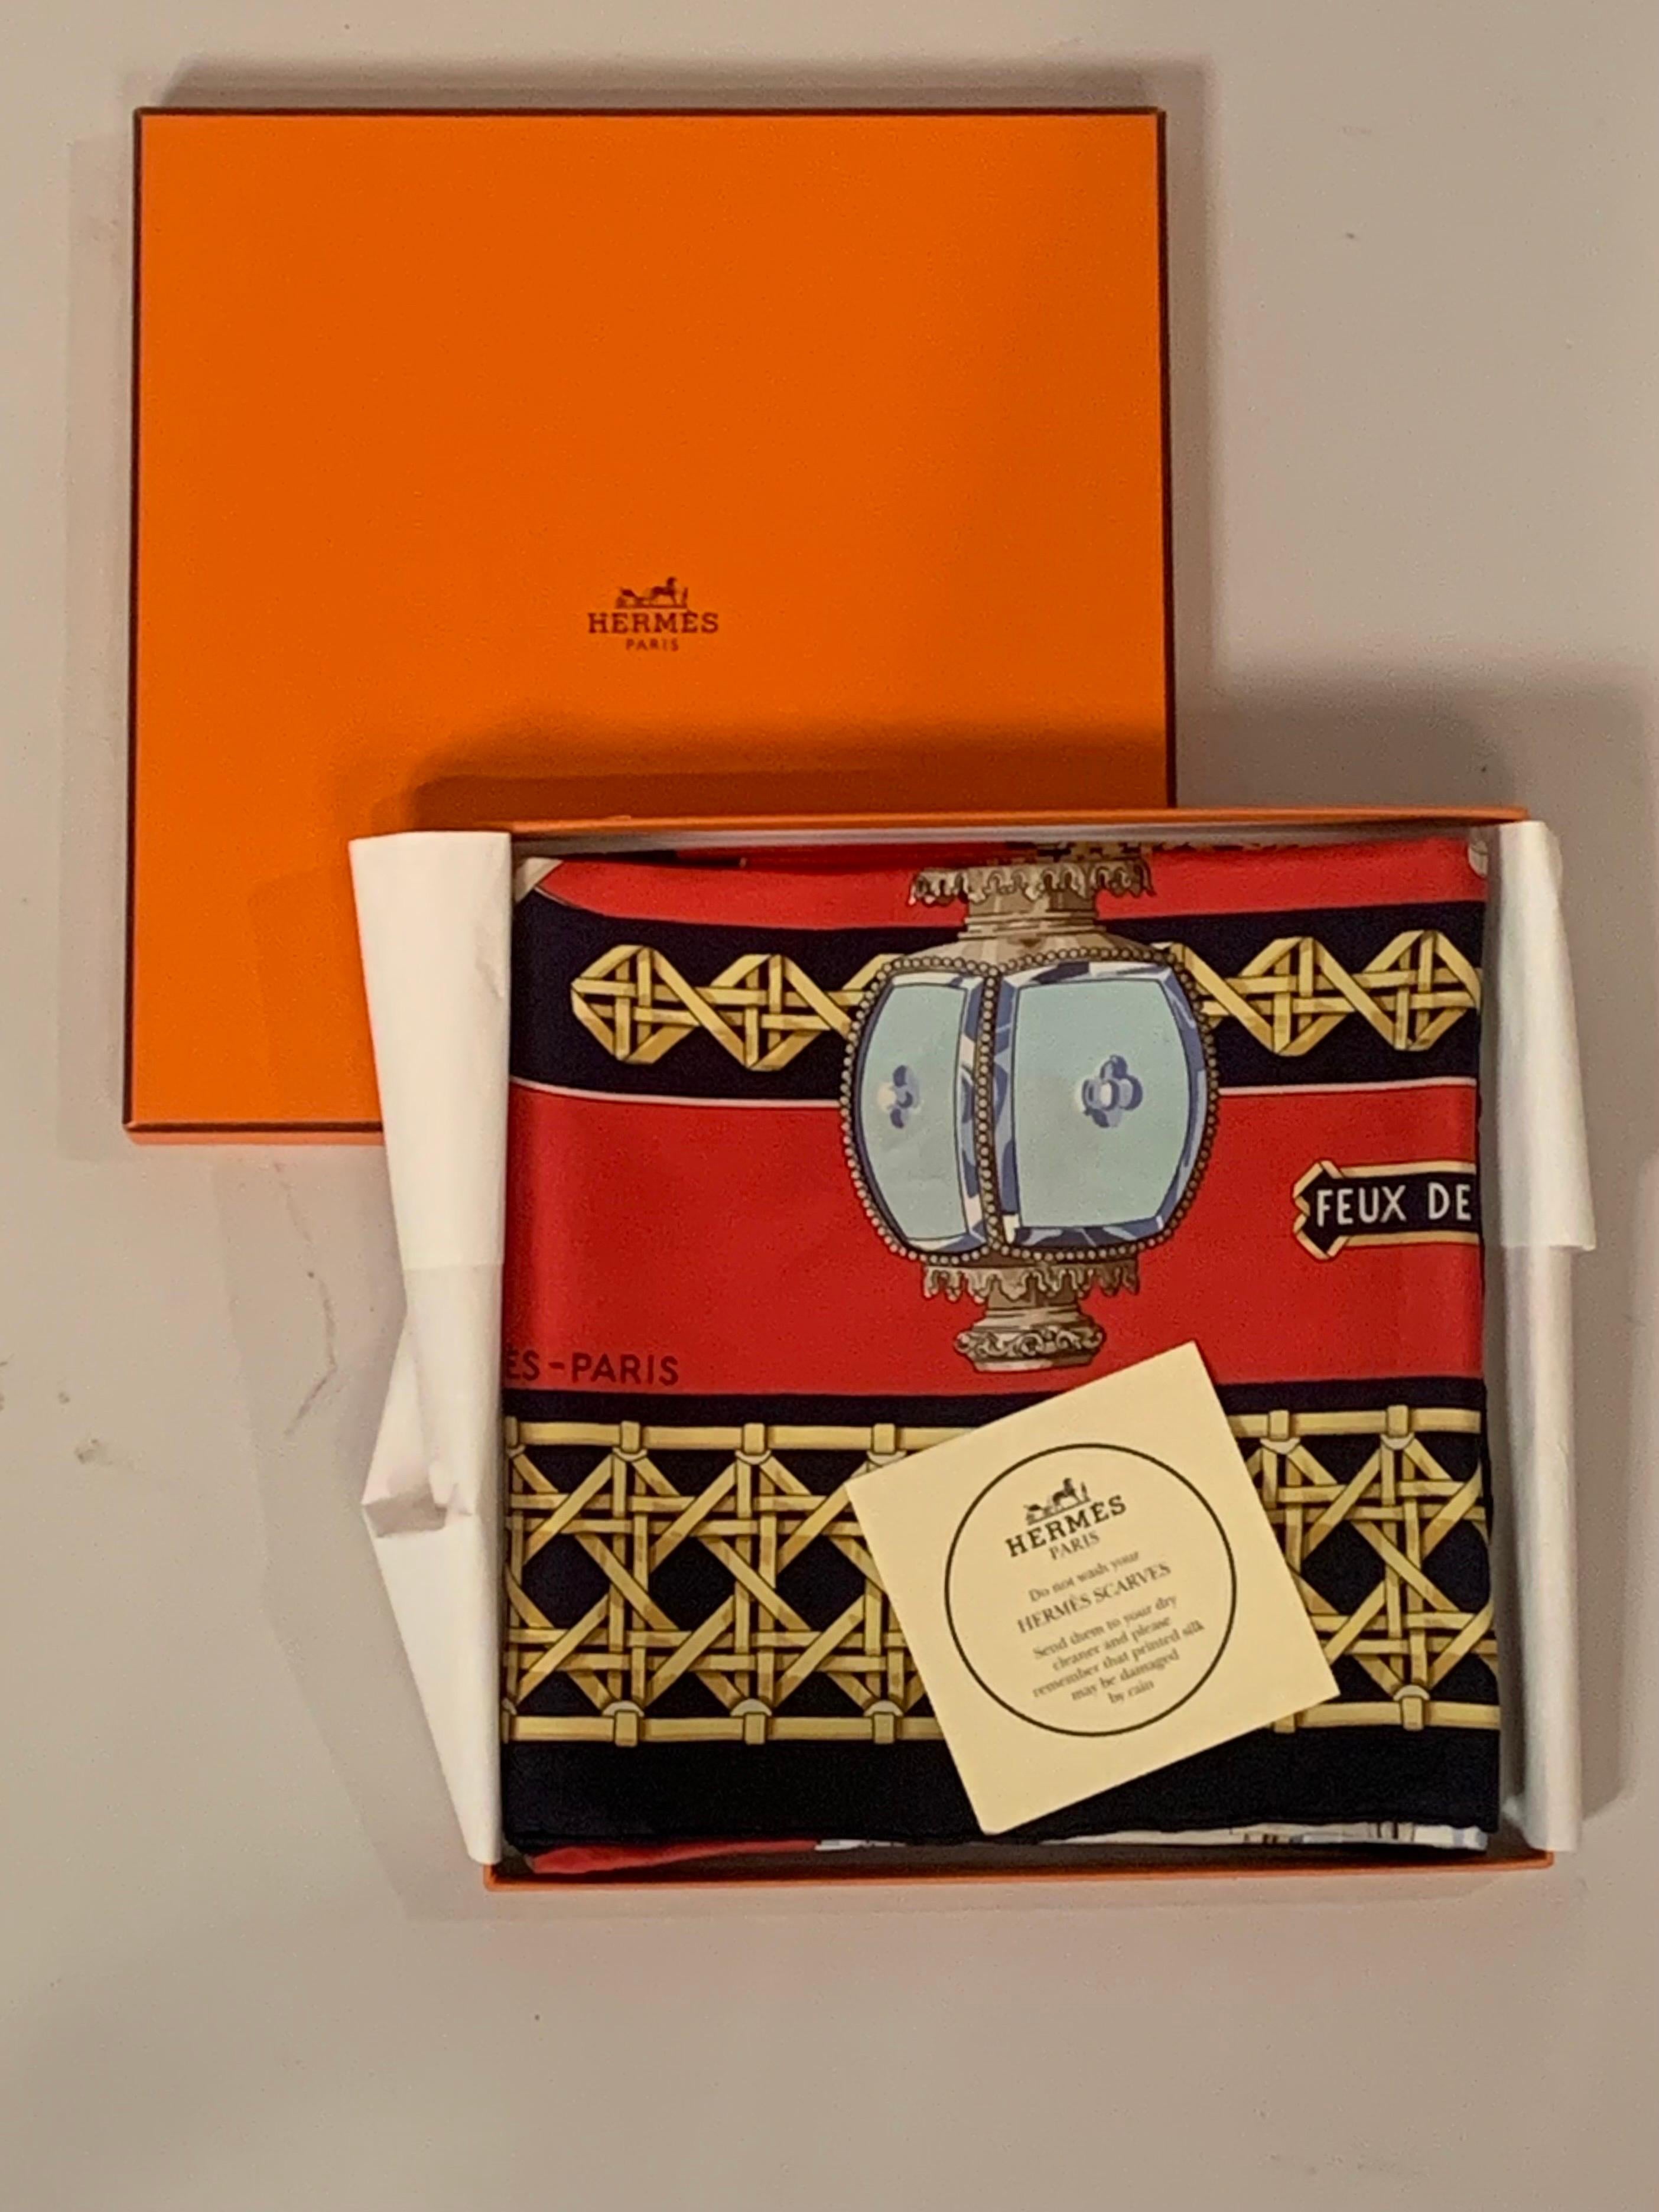 Hermes Silk Scarf Feux De Route Never Worn with Original Box For Sale 4